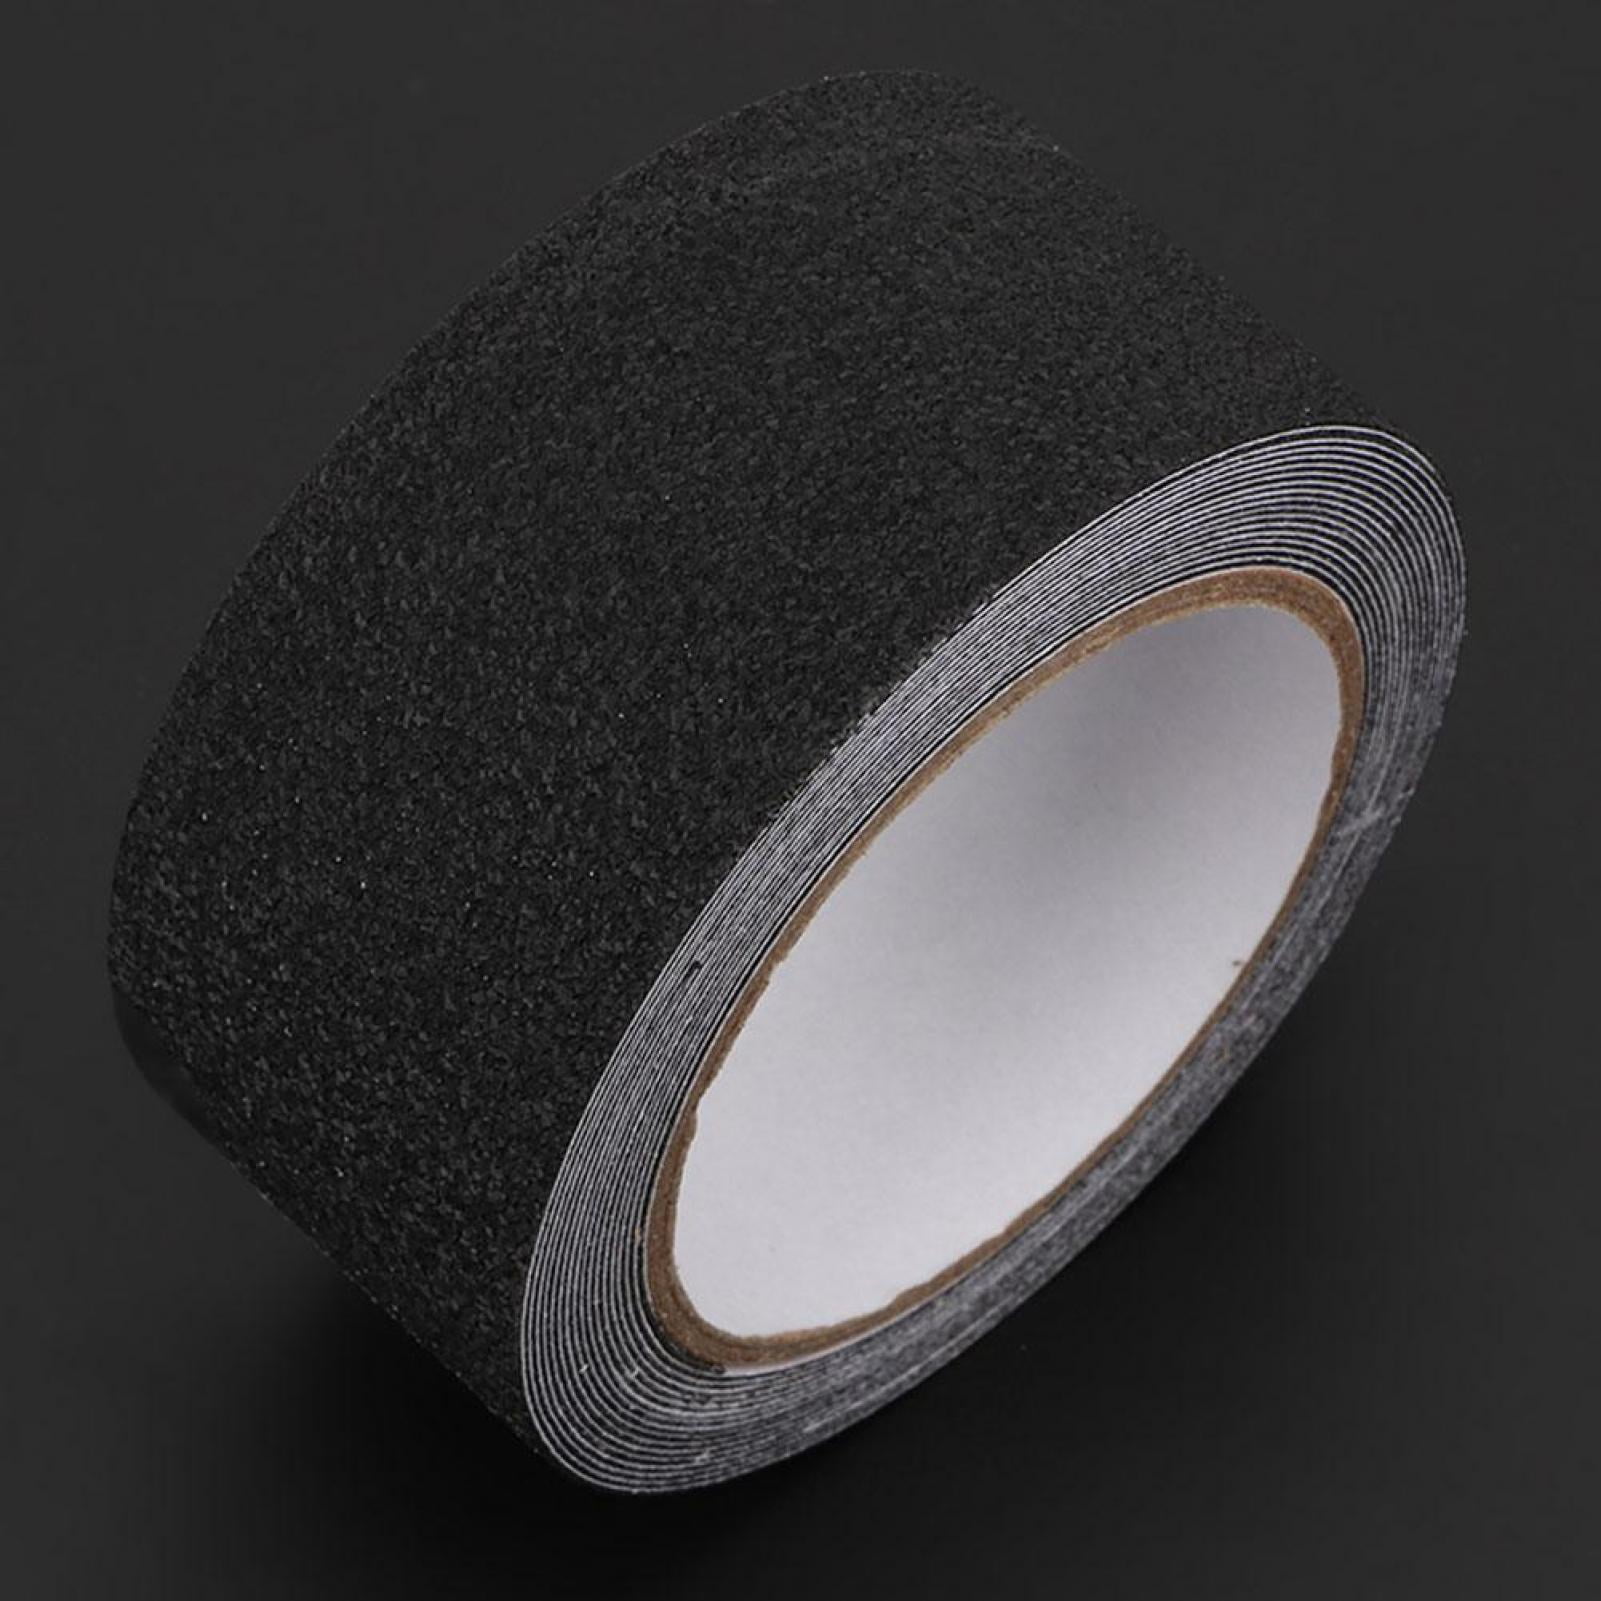 Windfall Anti Slip Safety Grip Tape, Non Skid Tread for Stairs, Steps,  Floors, Caution Dangerous Zones, Indoor and Outdoor Use PVC Frosted Tape